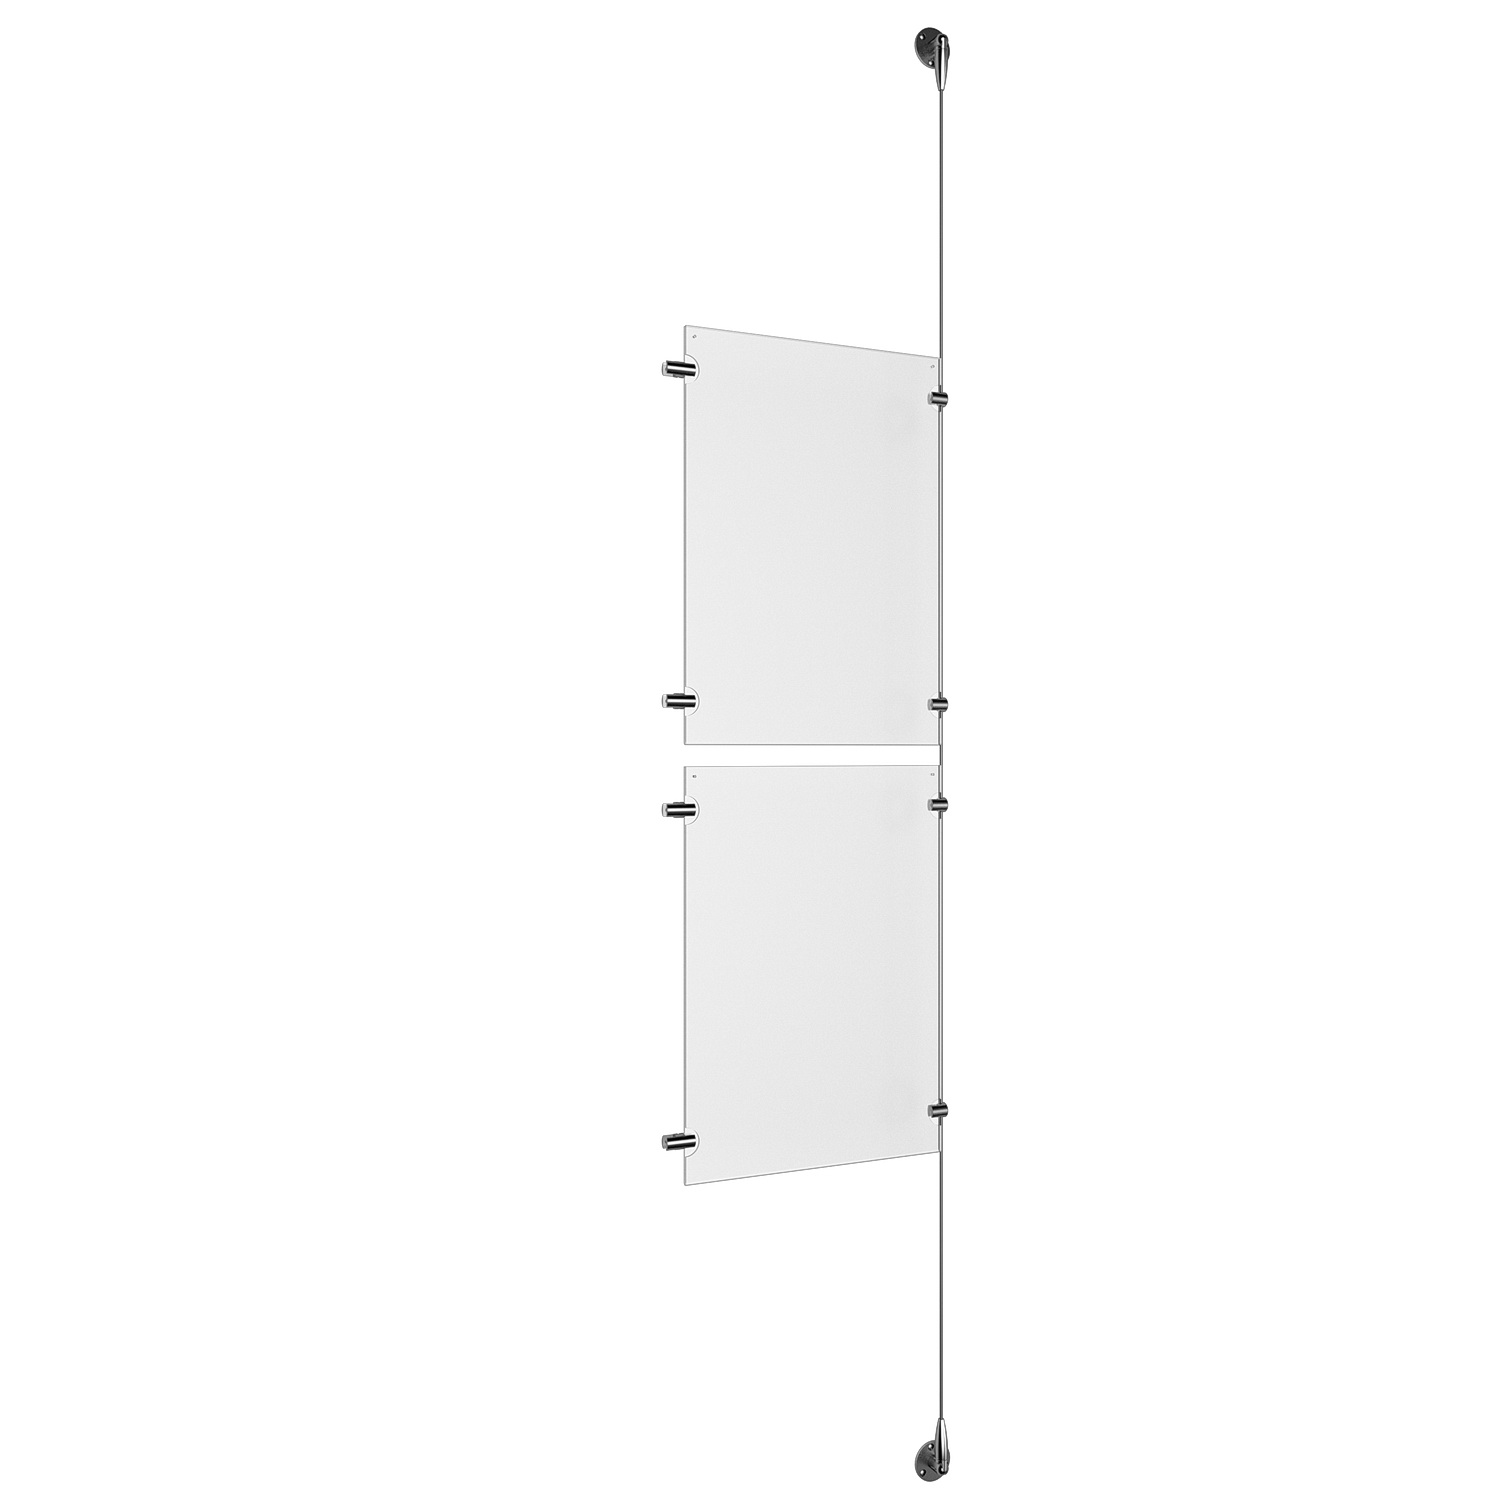 (2) 11'' Width x 17'' Height Clear Acrylic Frame & (1) Stainless Steel Satin Brushed Adjustable Angle Signature 1/8'' Cable Systems with (4) Single-Sided Panel Grippers (4) Double-Sided Panel Grippers